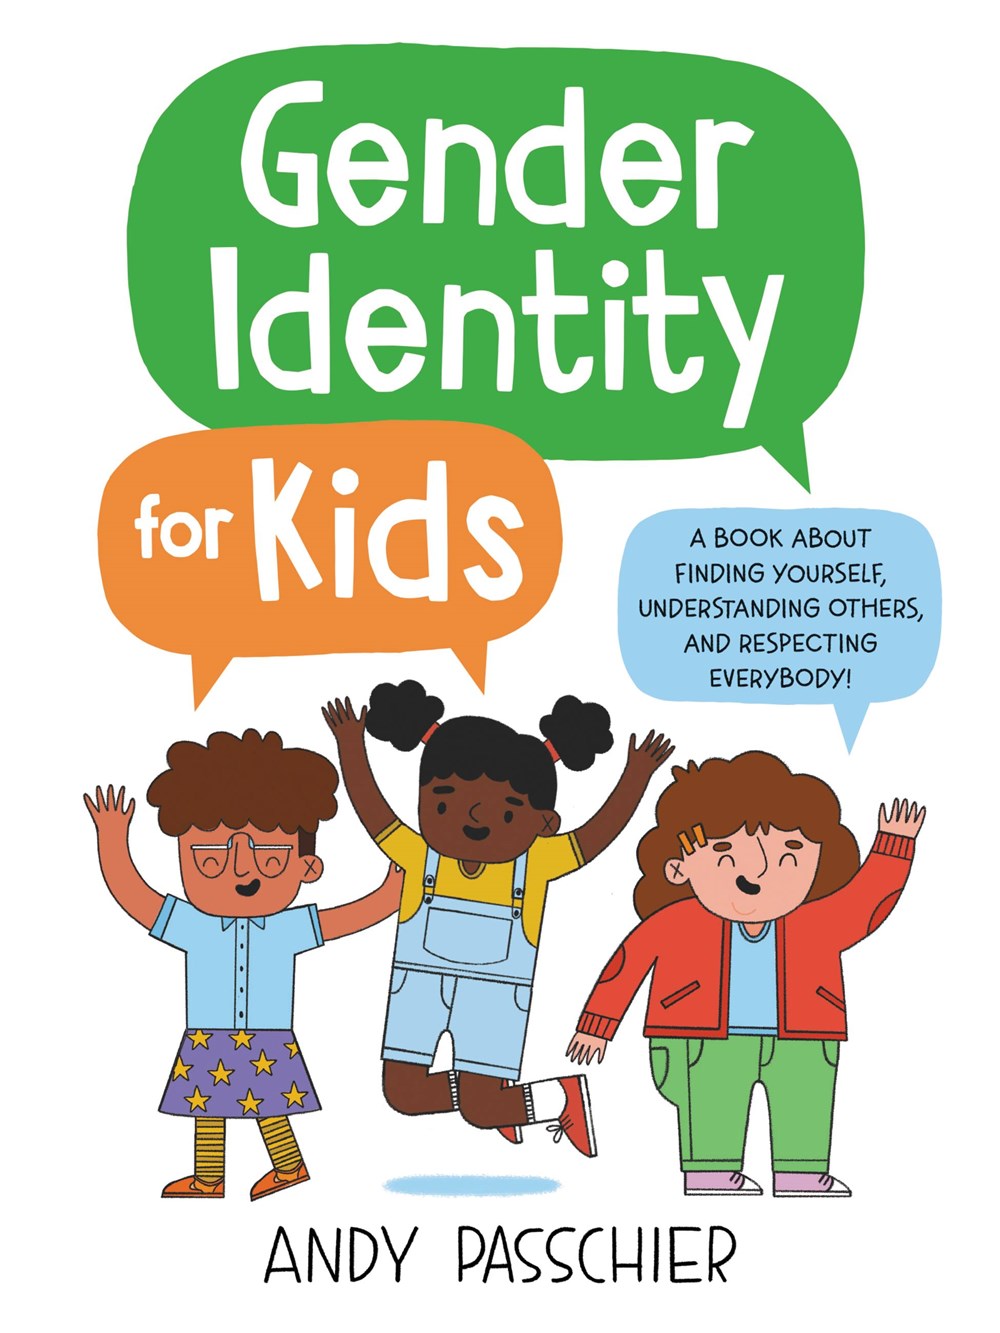 Gender Identity for Kids by Andy Passchier